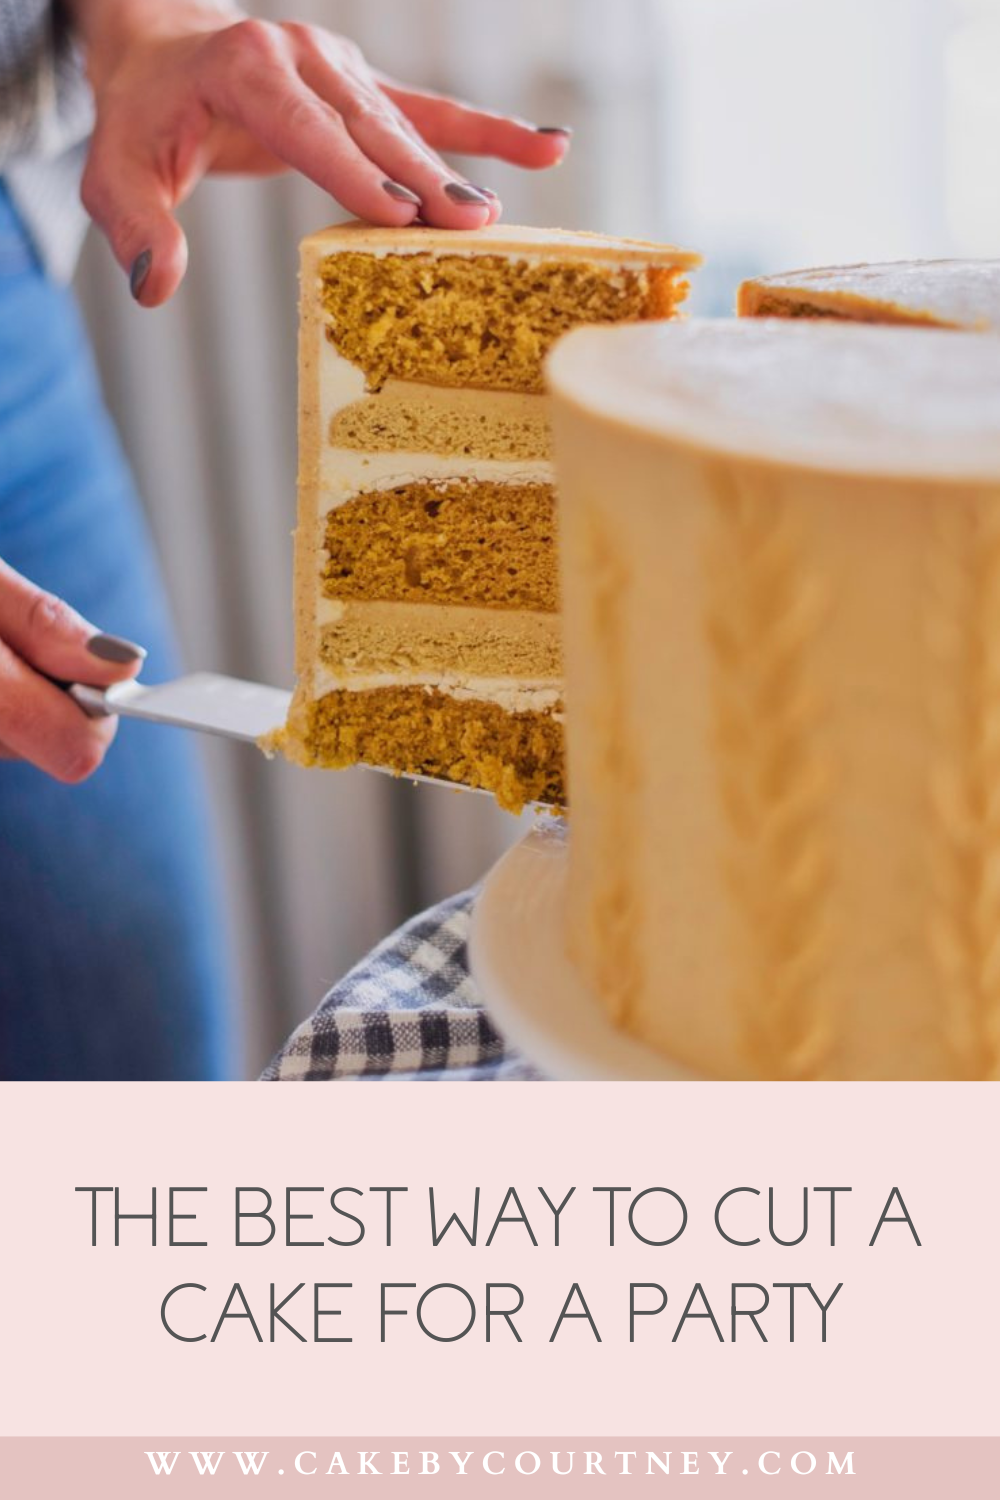 quick tips on how to cut a cake for a party. Here are a few tips on how to cut a cake for a party! You'll get nice and beautiful slices every time. www.cakebycourtney.com